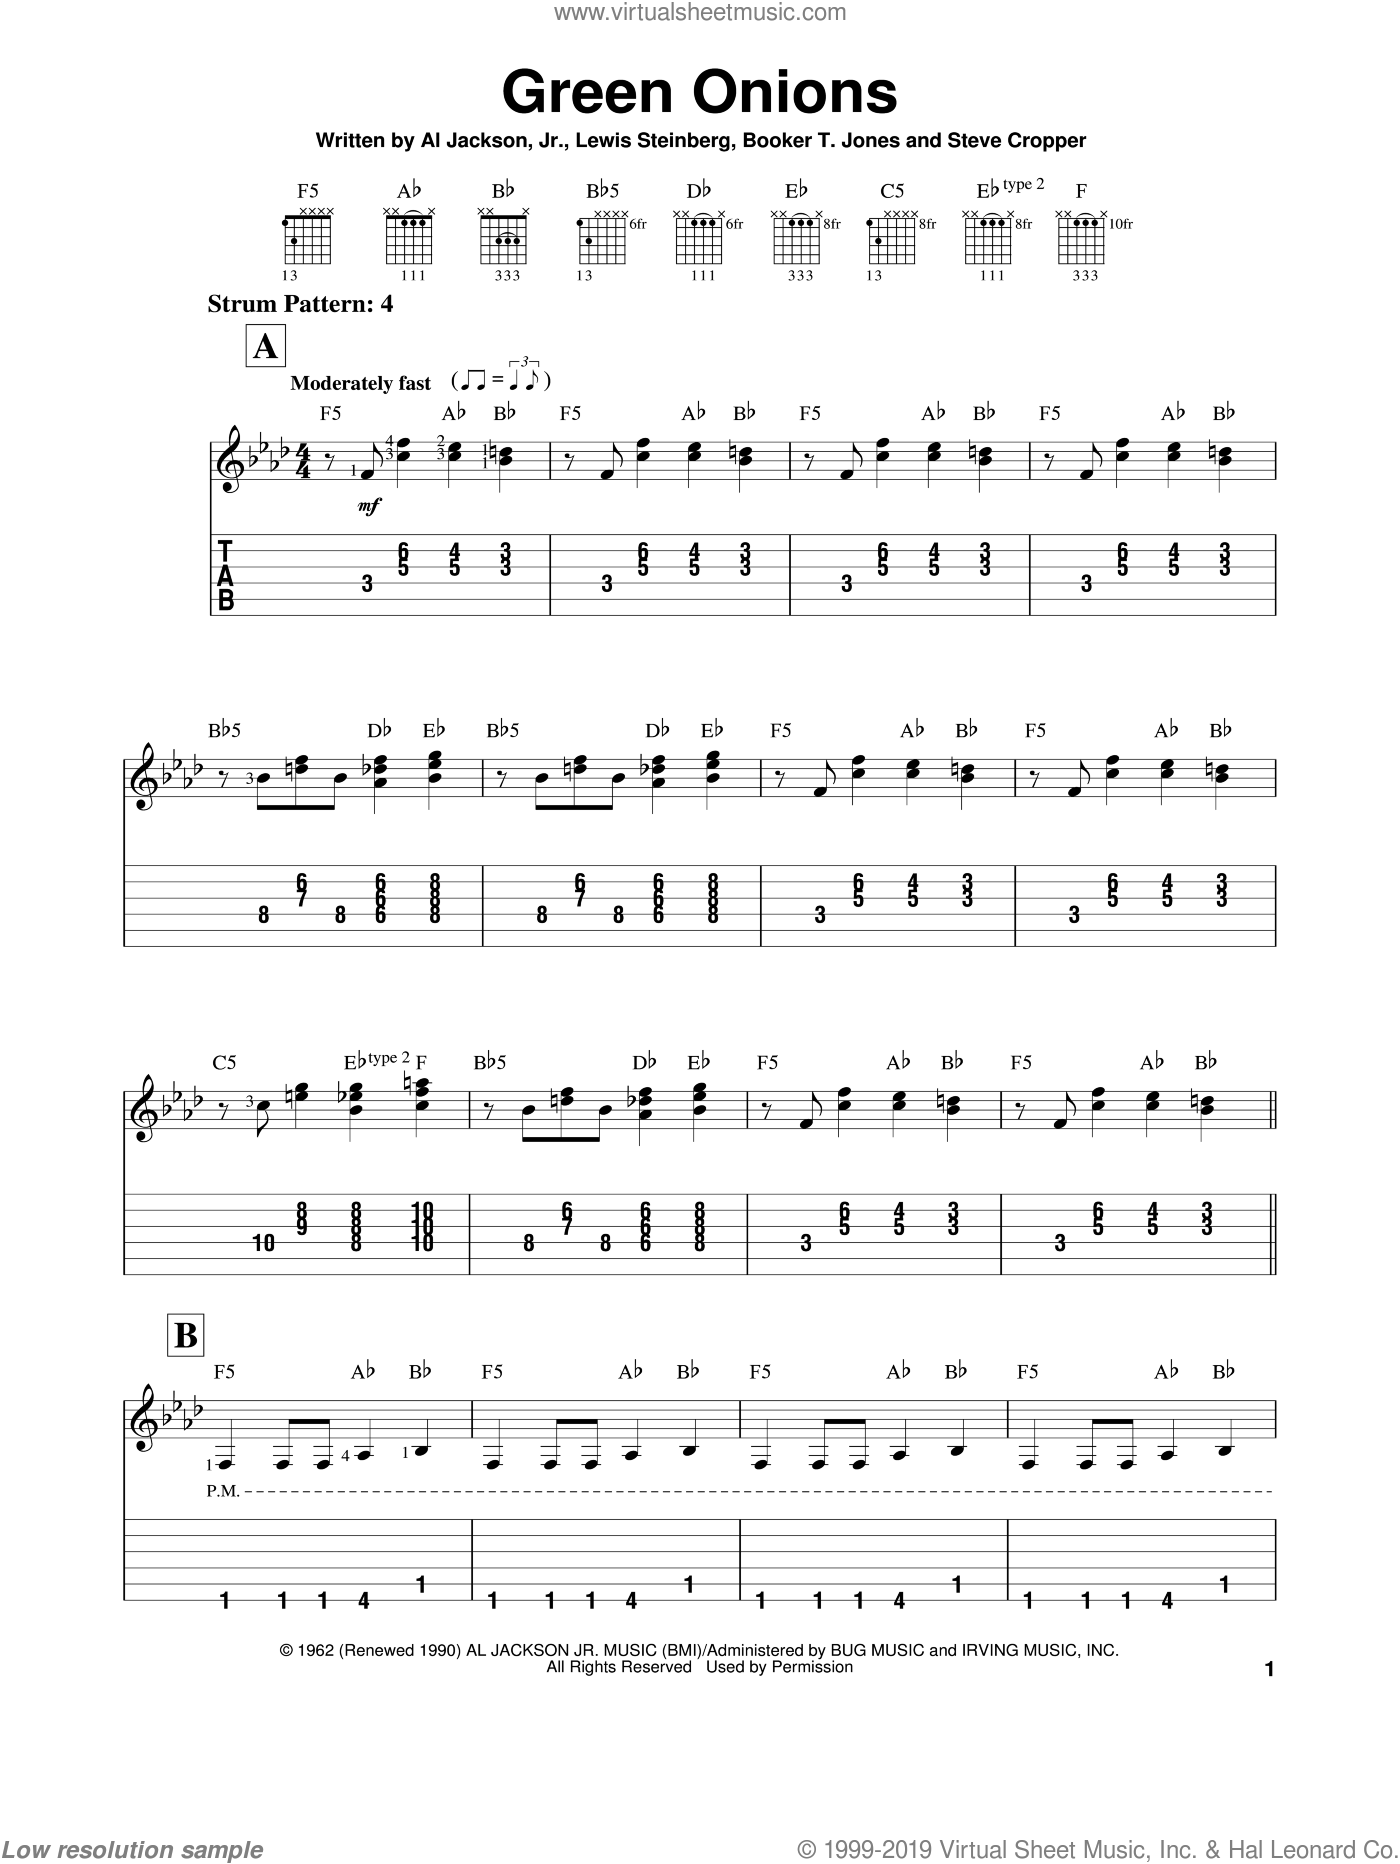 Mg S Green Onions Sheet Music For Guitar Solo Easy Tablature,Purple Finch Images